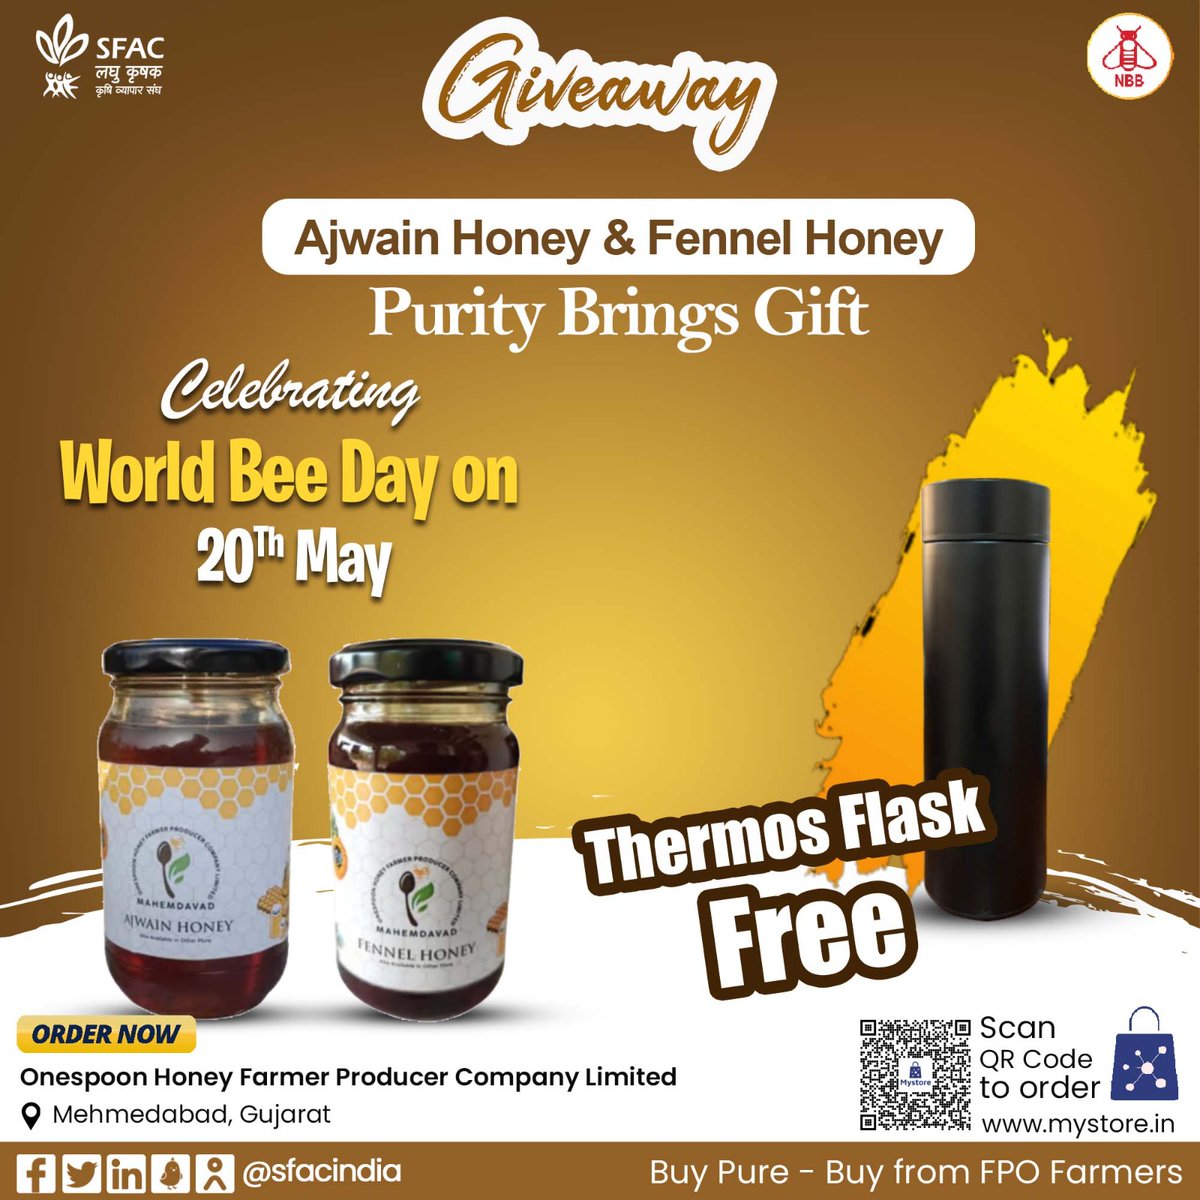 Giveaway on World Bee Day
Valid for first 5 orders
Bee 🐝youthful, bee🐝 strong & WIN gift🎁. Enjoy the bliss of purity with natural honey.

Buy straight from FPO bee farmers at👇

mystore.in/en/product/ses…

🍯

#VocalForLocal #HealthyChoices #HealthyEating #honey #healthylifestyle